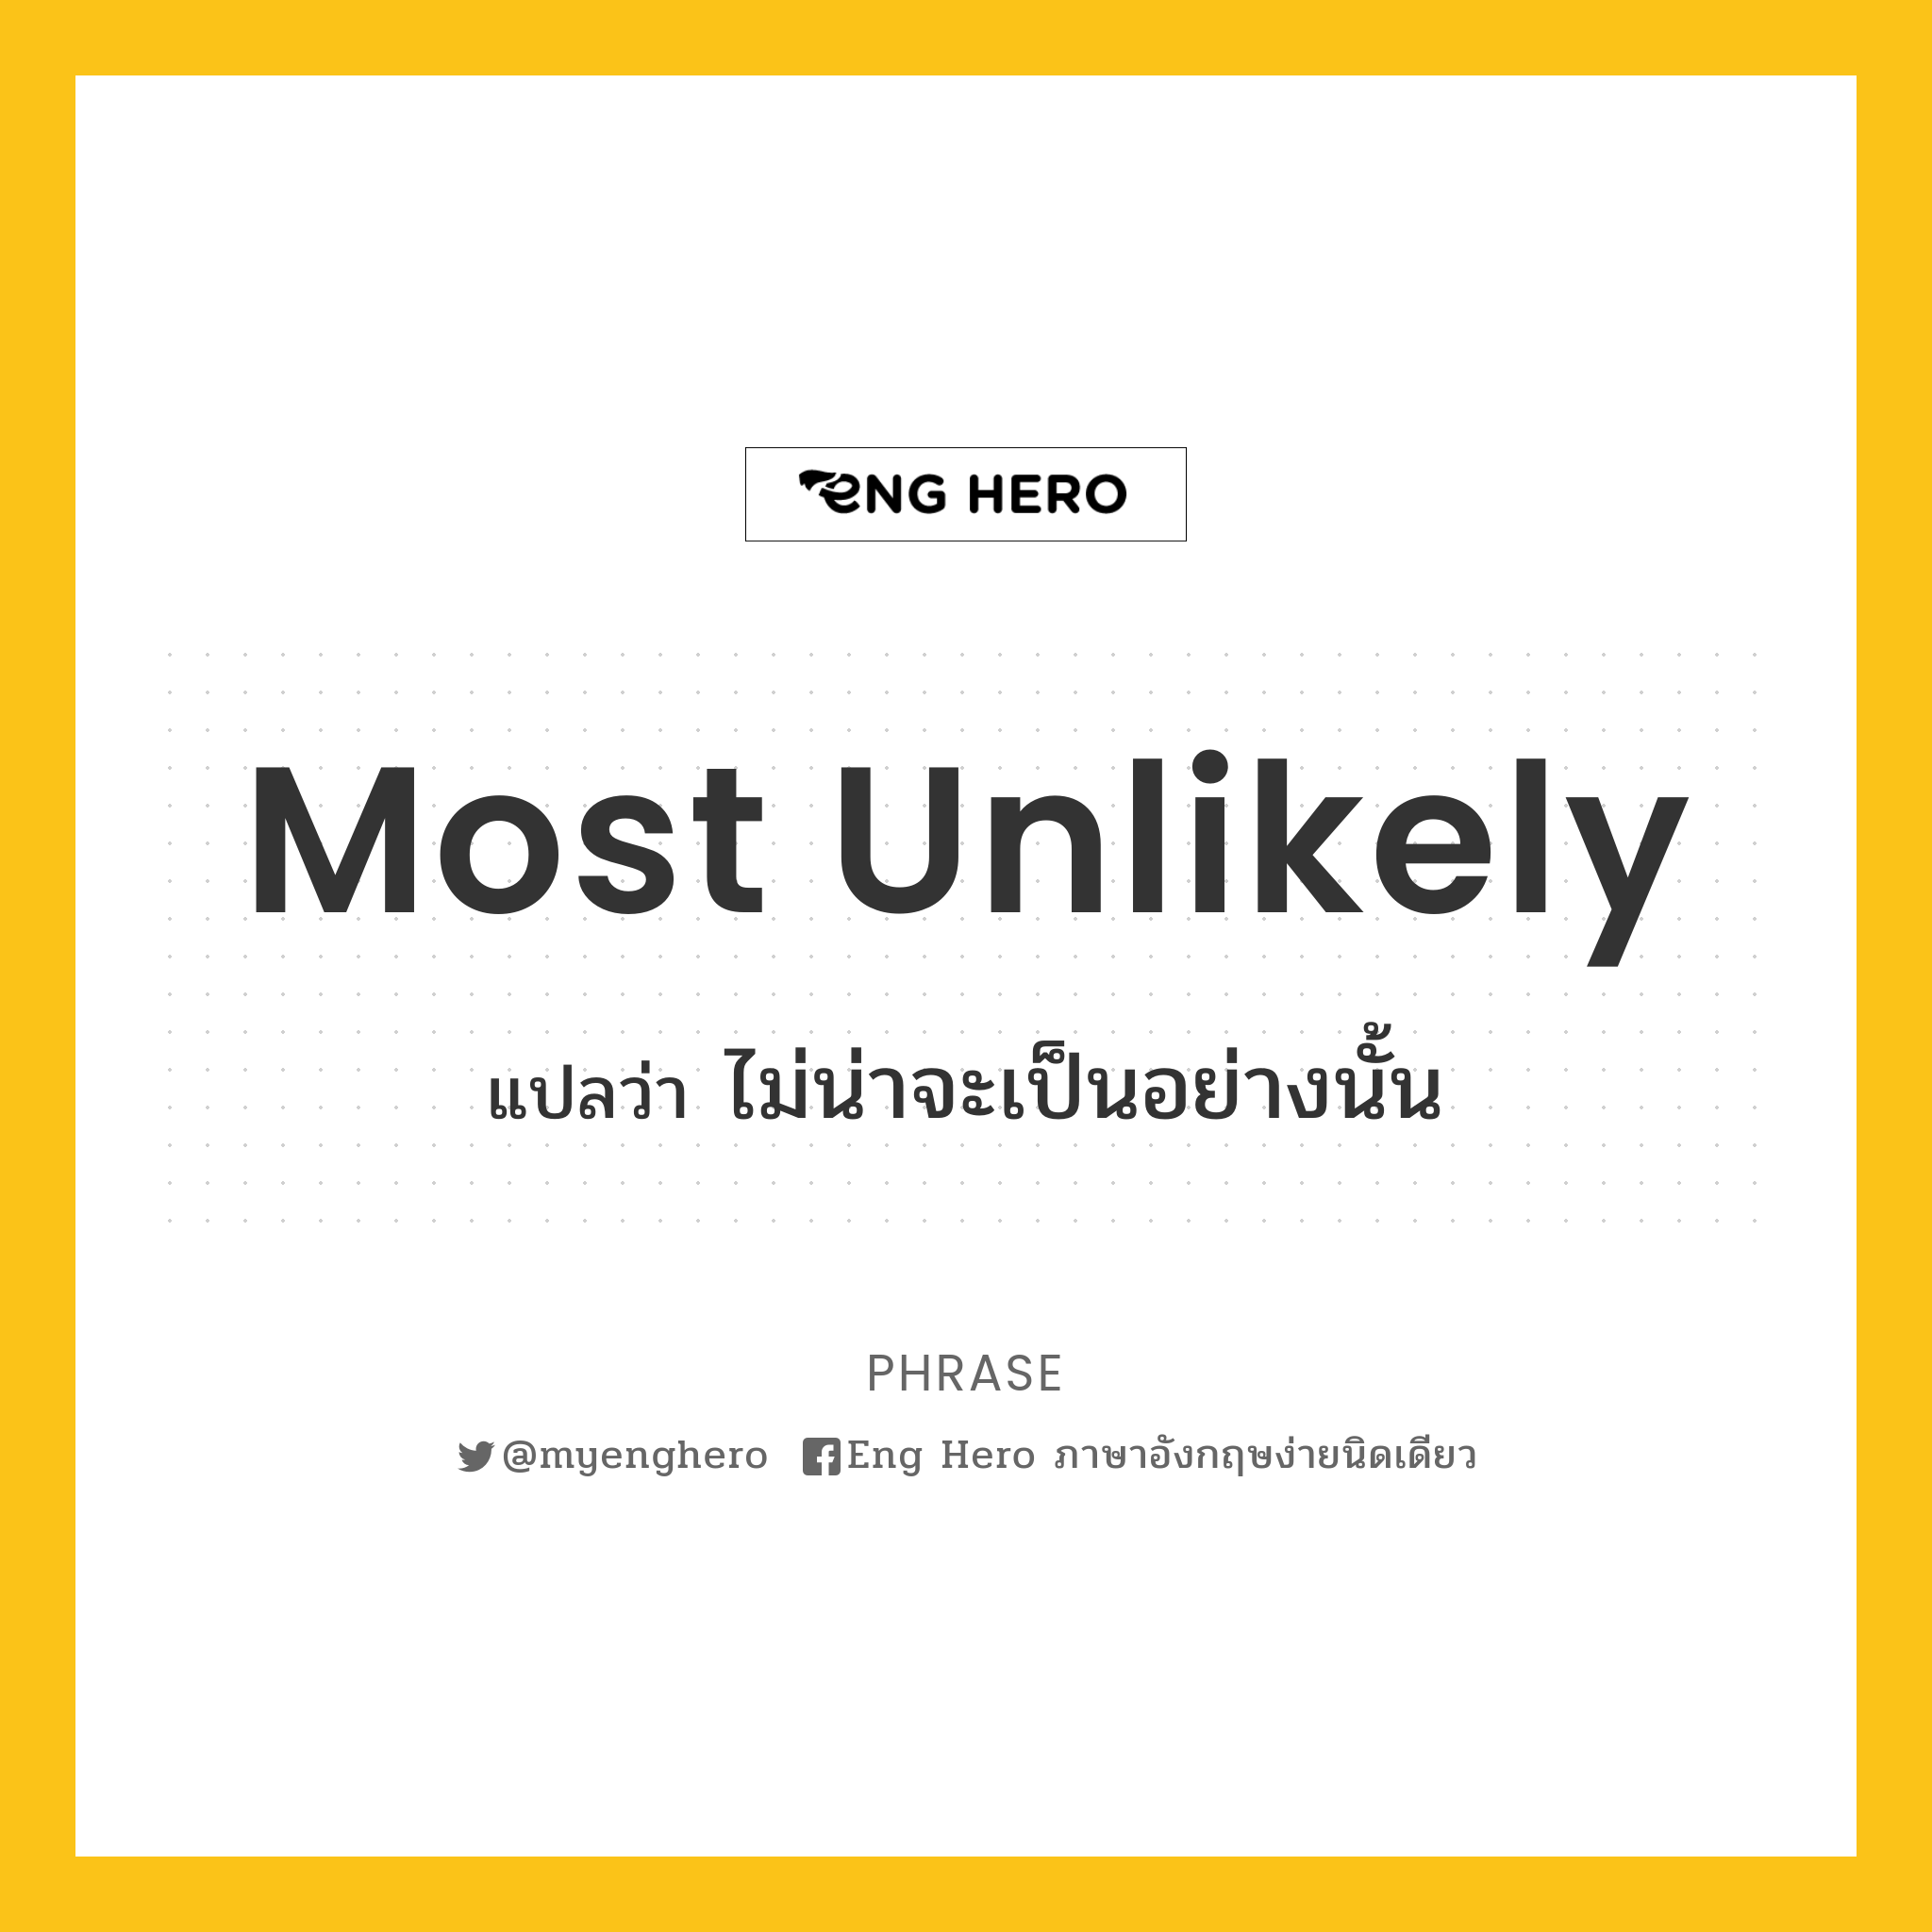 Most unlikely